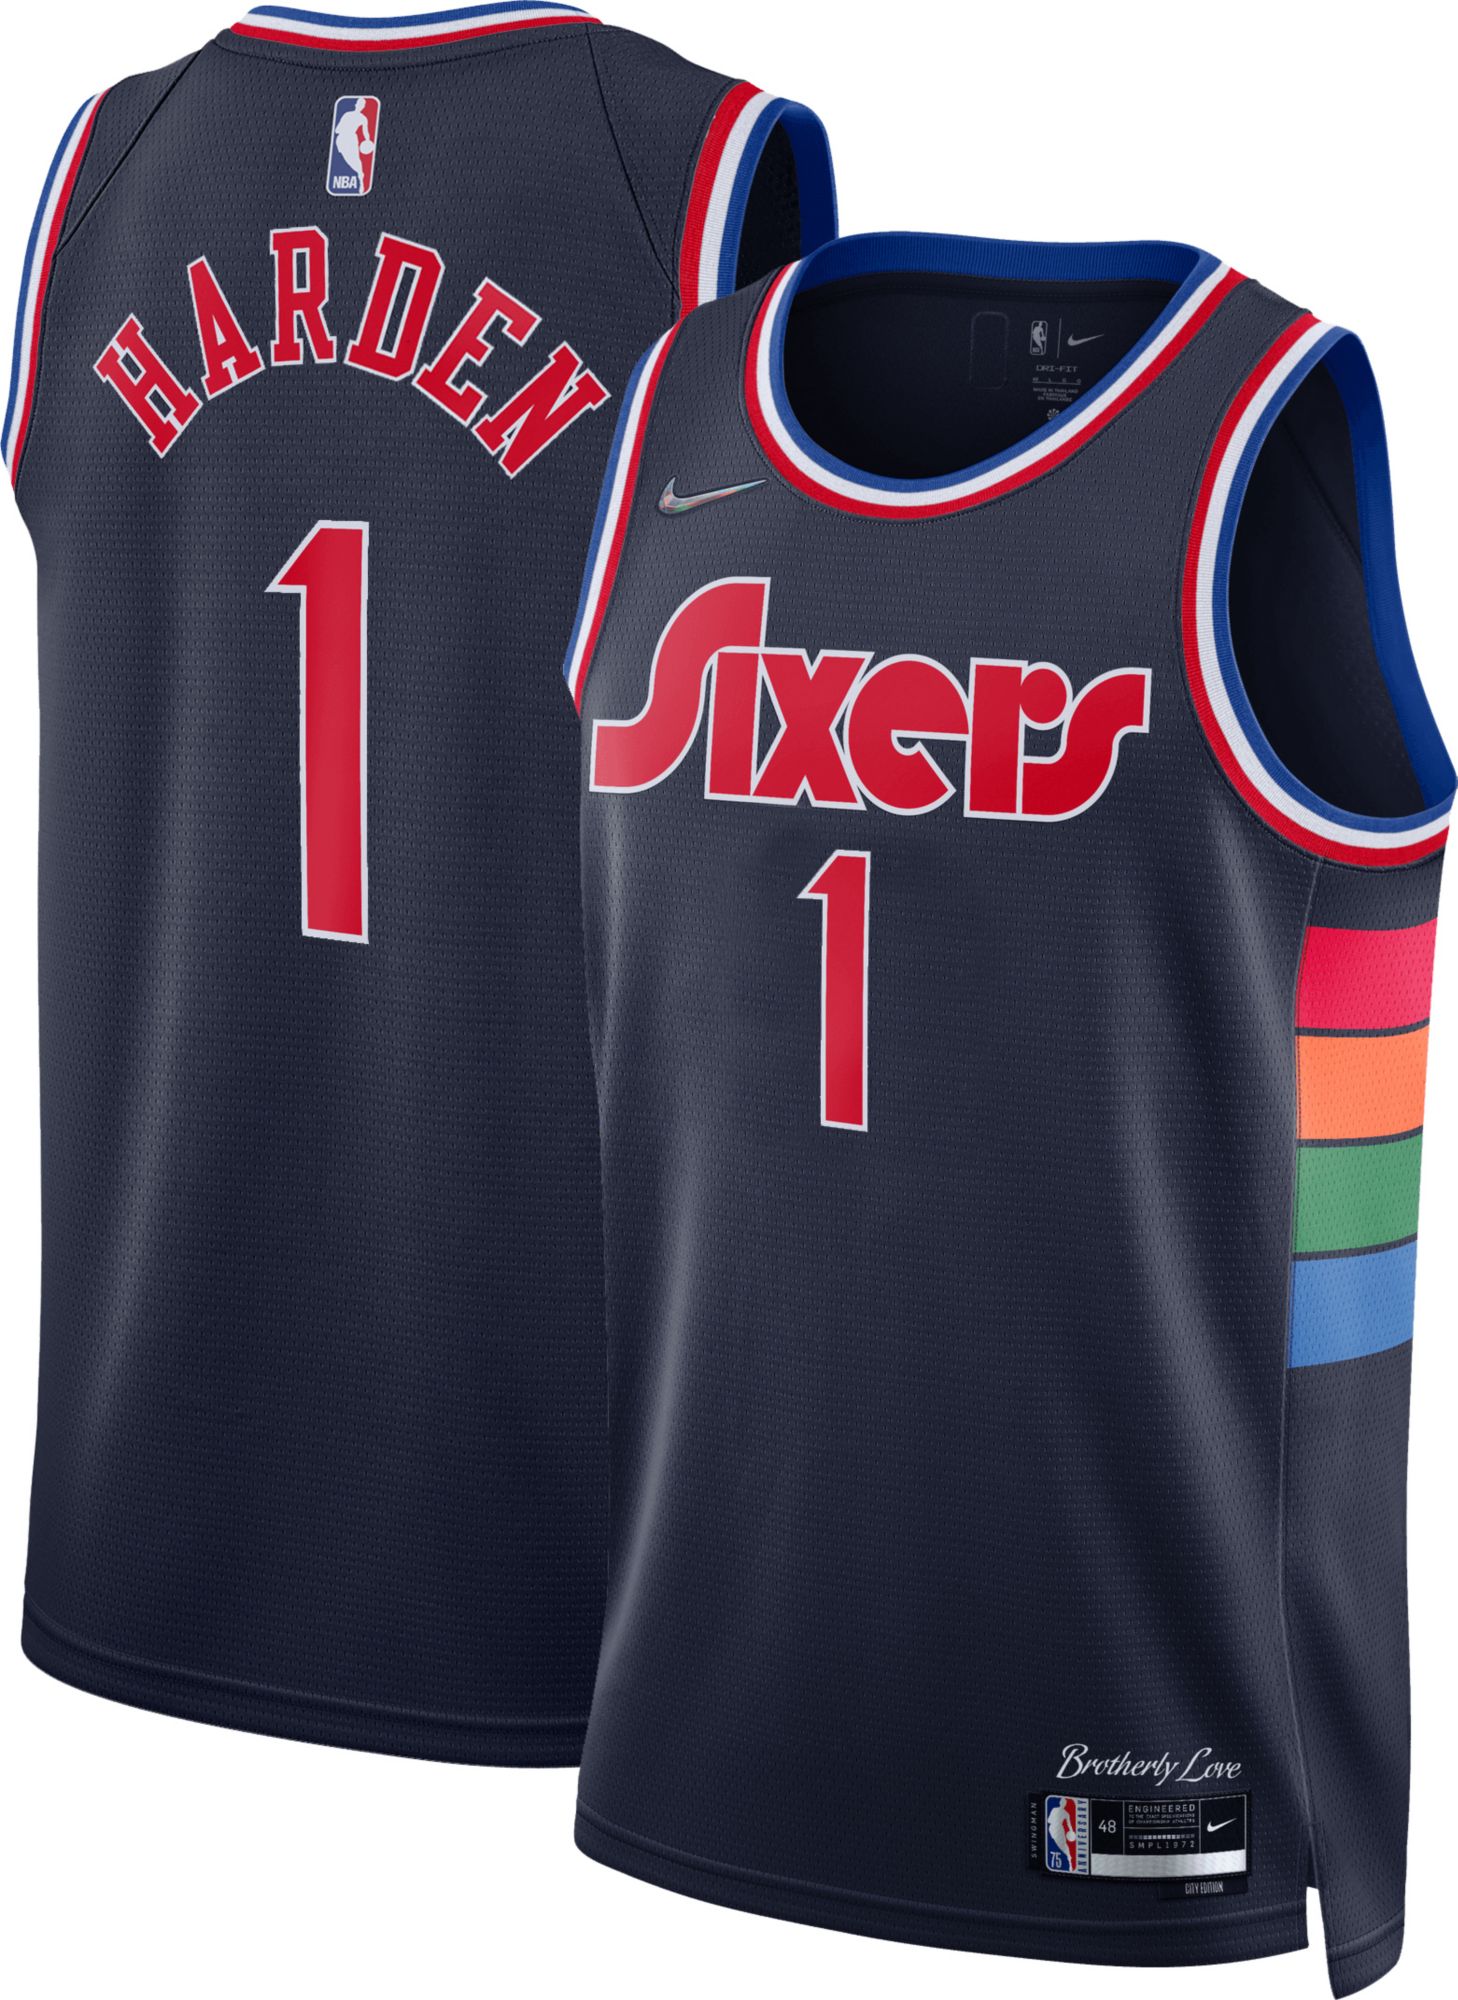 2021 sixers jersey